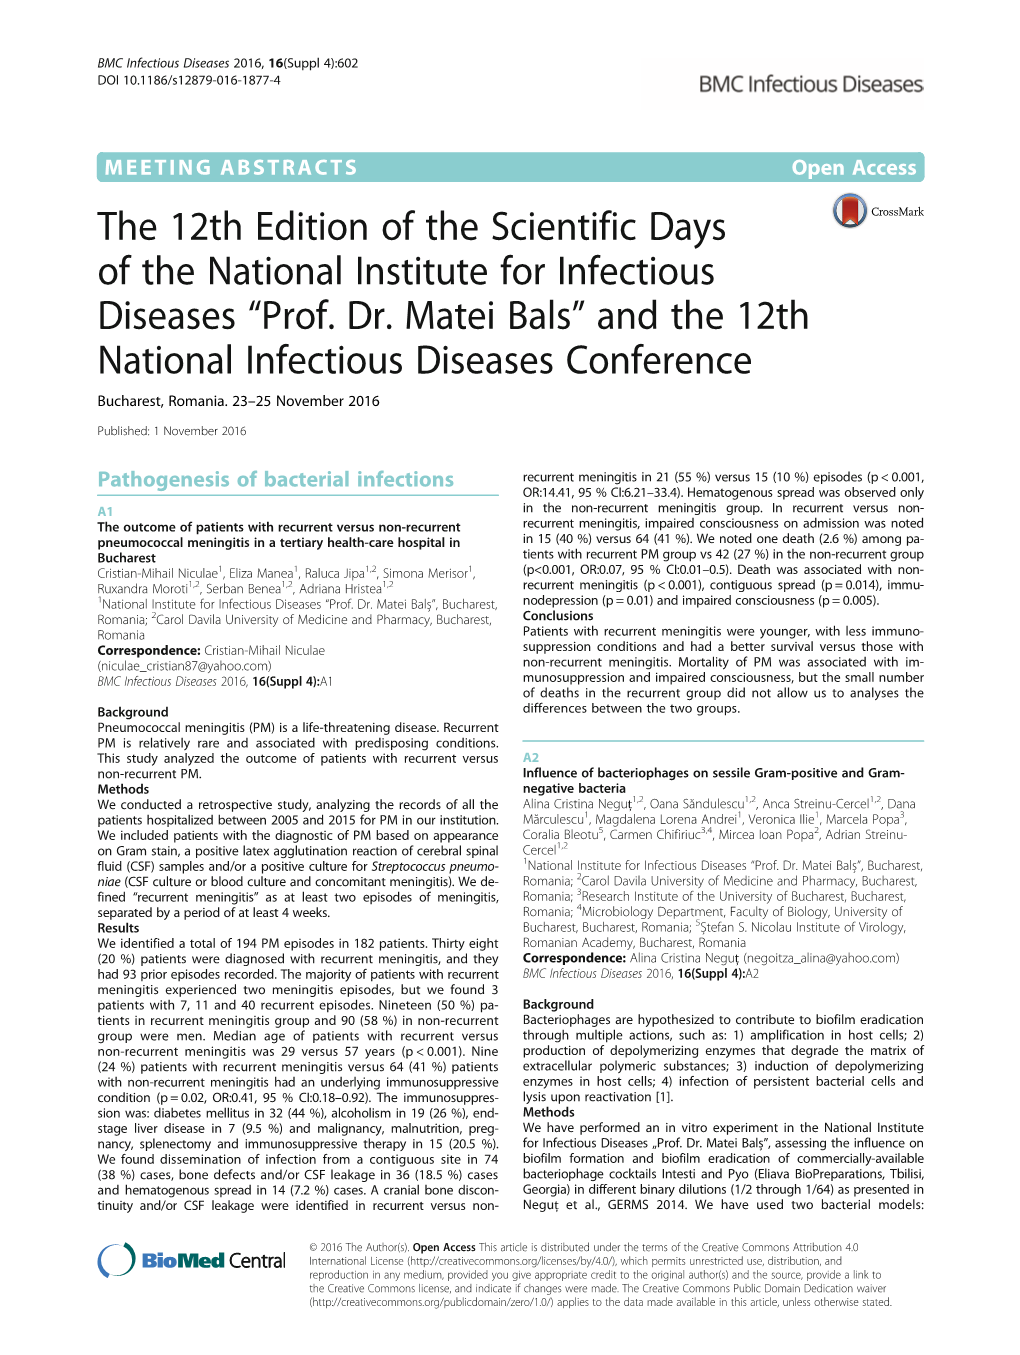 Prof. Dr. Matei Bals” and the 12Th National Infectious Diseases Conference Bucharest, Romania